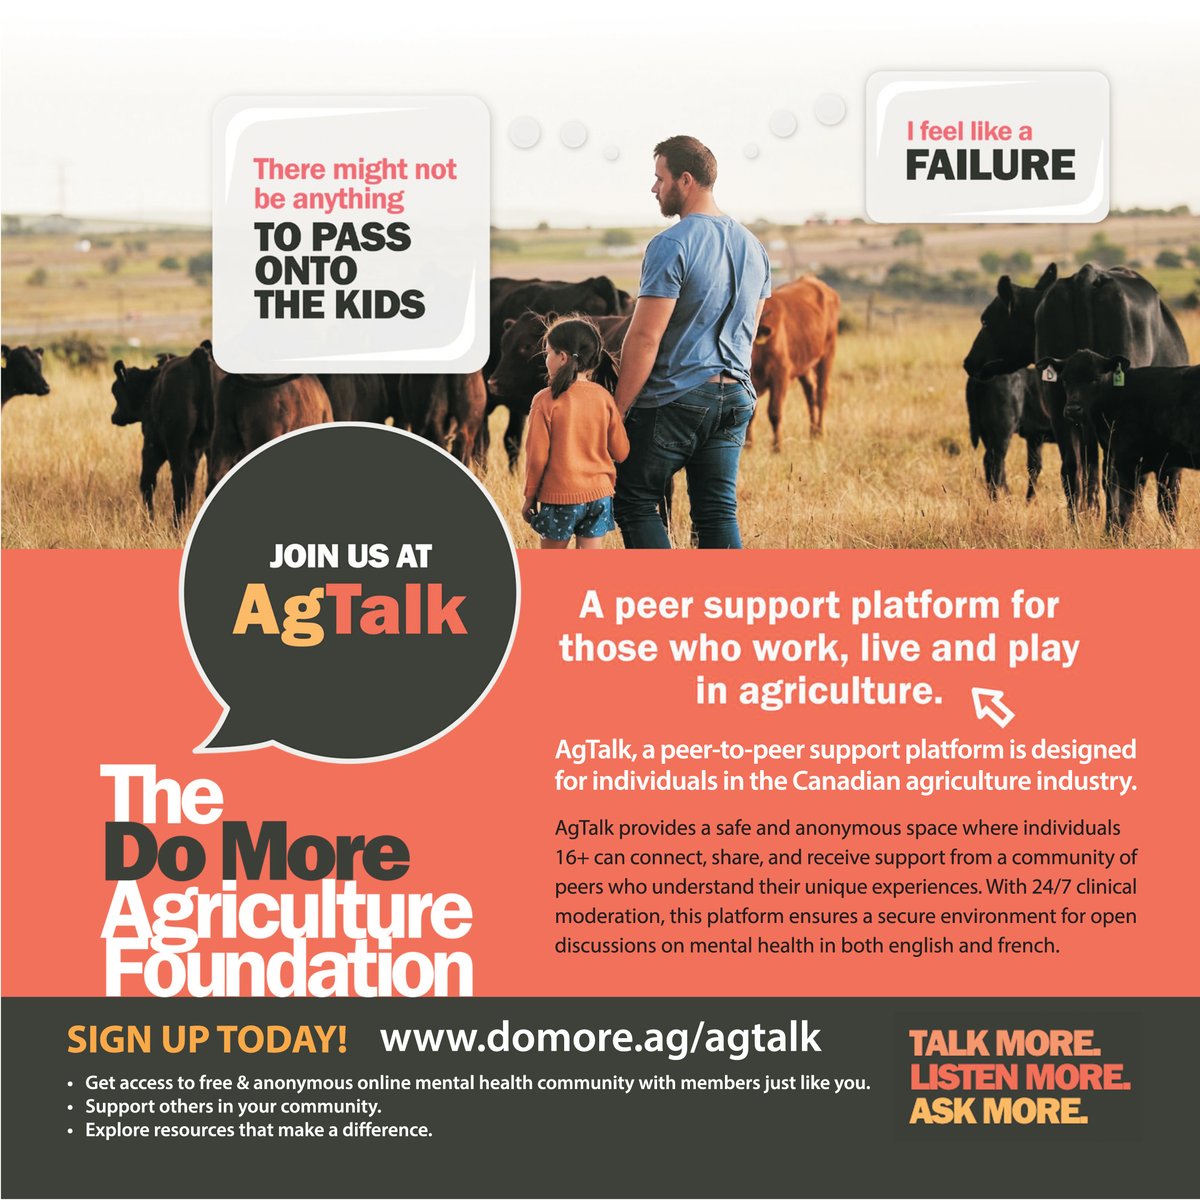 Atlantic Beef Products Inc. is a proud promoter of this important mental health support program . . .

For more information visit: domore.ag/agtalk

#AgTalk #JoinUs #DoMoreFoundation #TalkMore #ListenMore #AskMore #GoodMentalHealth #MentalHealthHelp #Agriculture